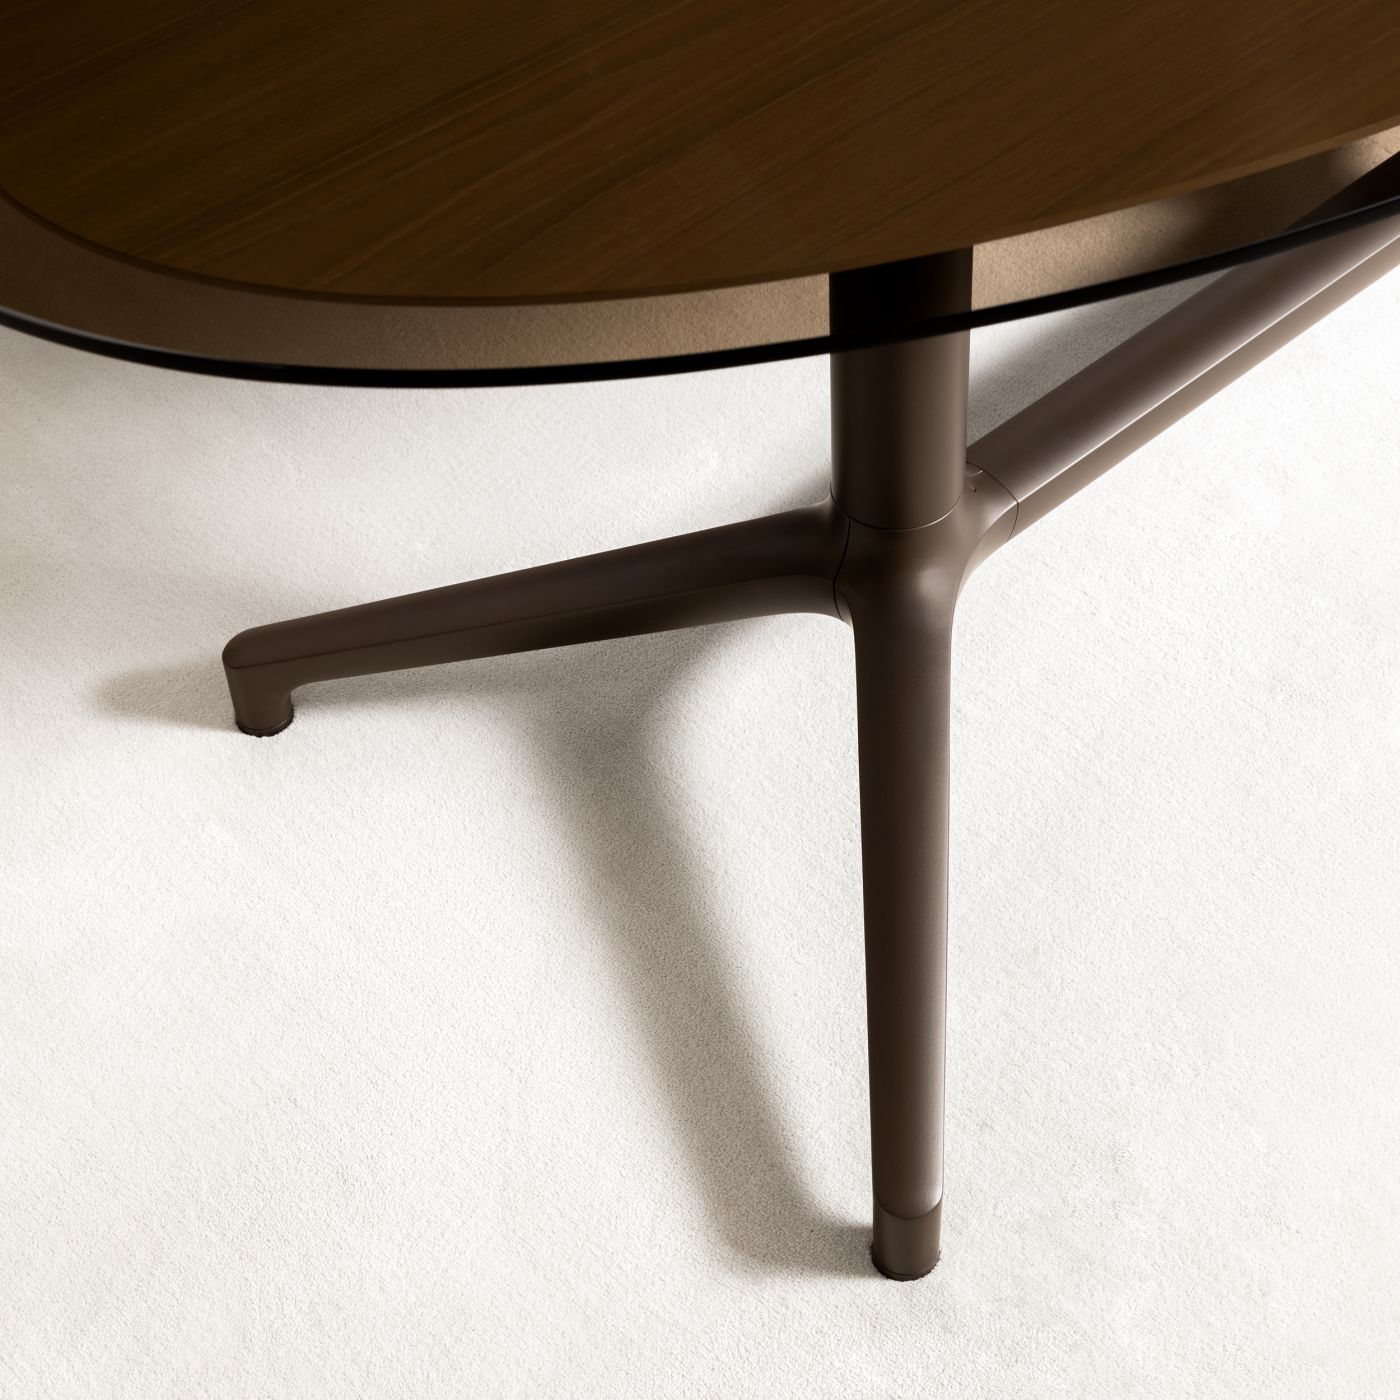 A luxuriously appointed Helm table with tinted bronze glass surface.